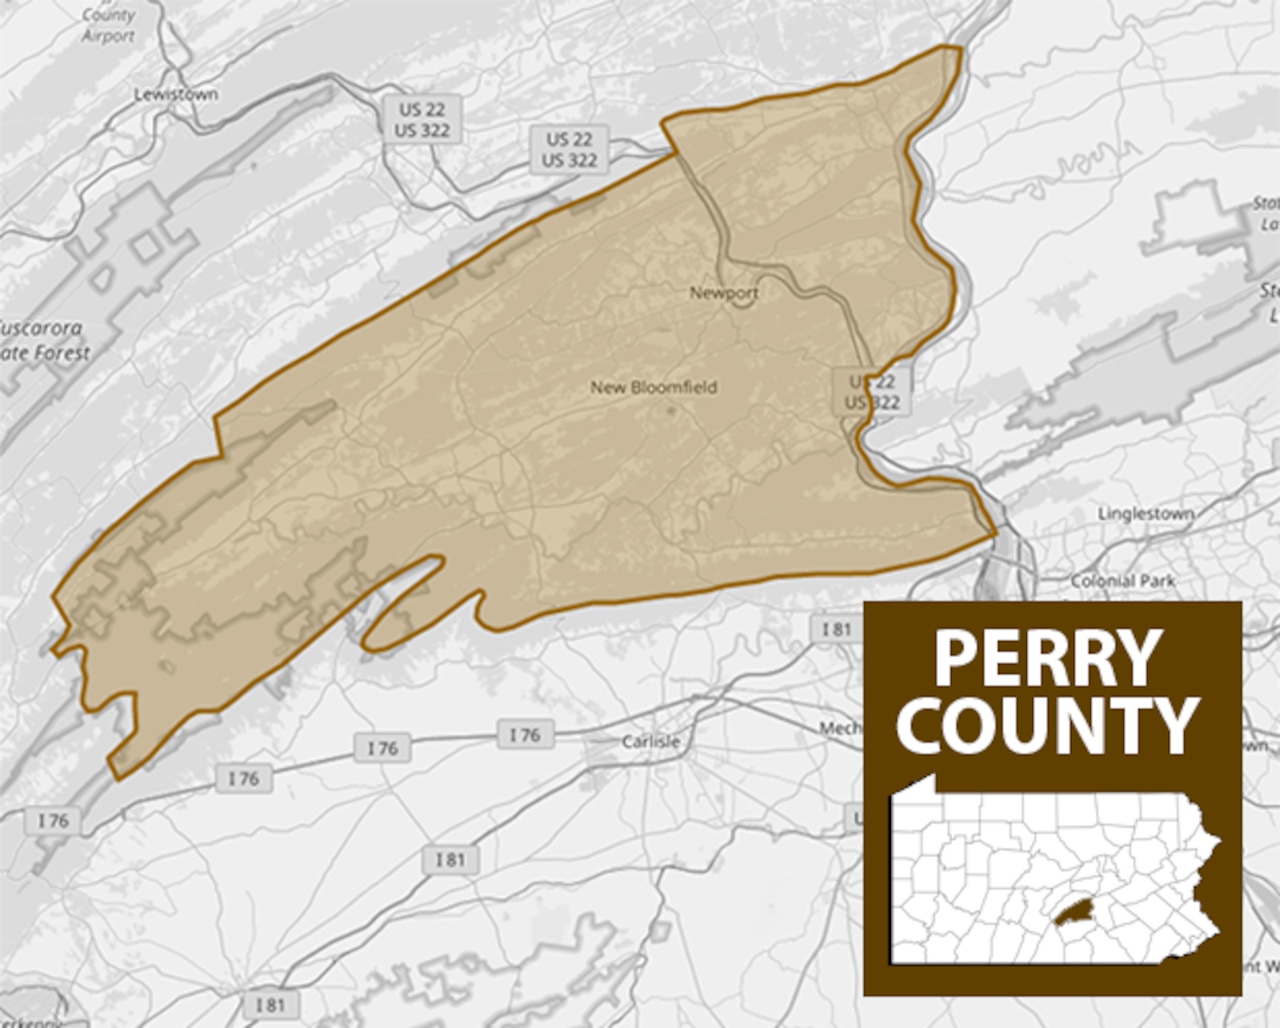 SEDA-COG reports on Perry County investments [Video]